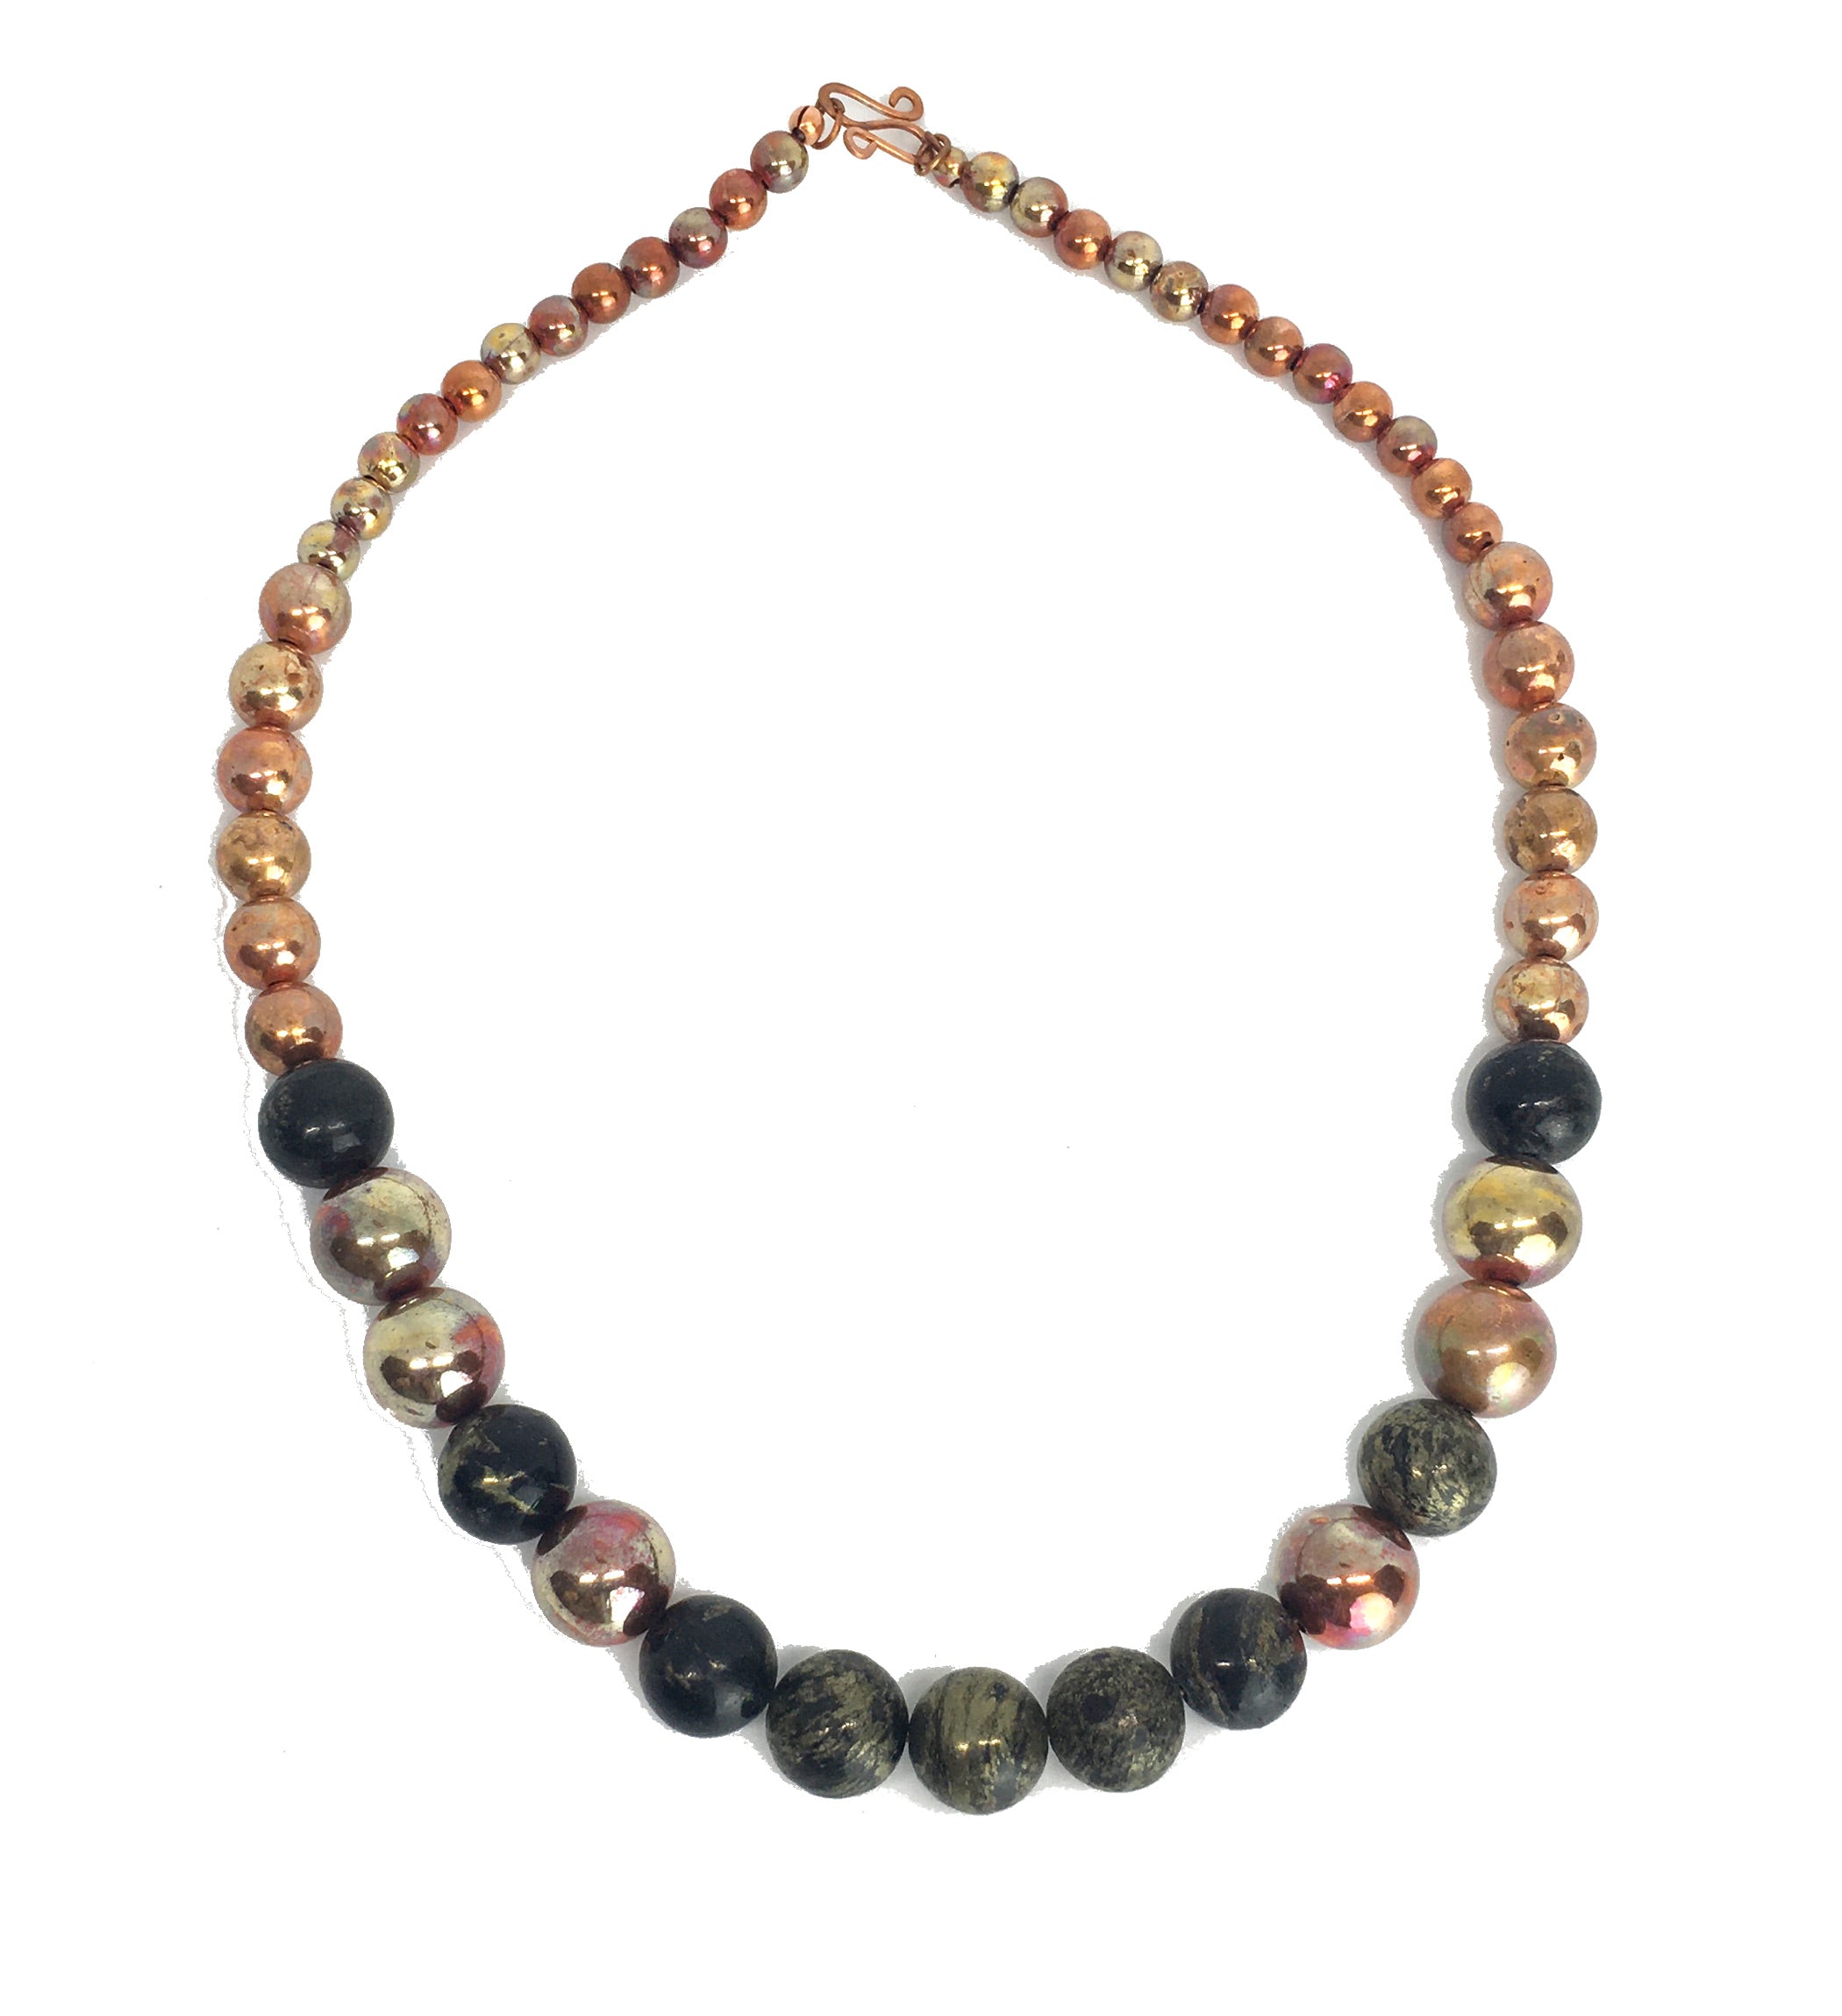 SOLD Apache Gold and Flame Painted Copper Beaded Necklace - Monsoon Series